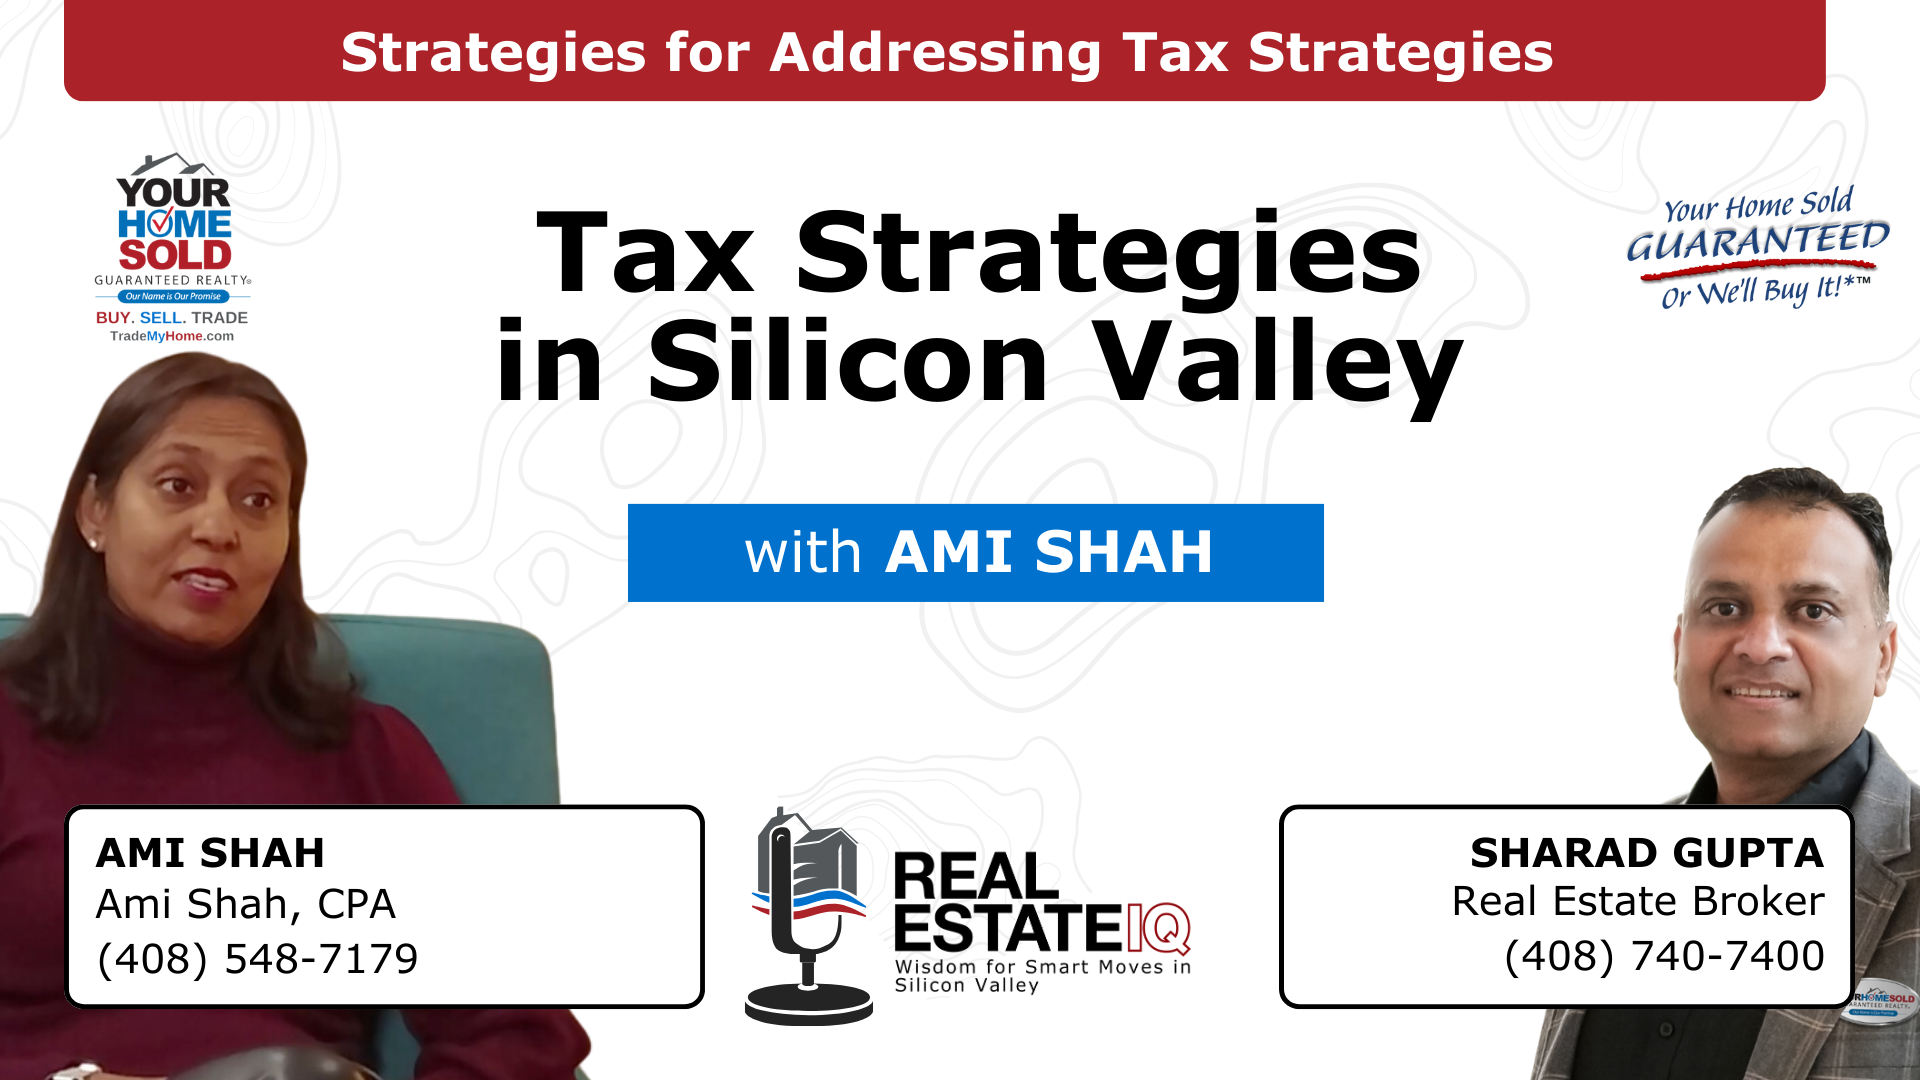 Tax Strategies: Addressing Silicon Valley's Tax Challenges and Strategies